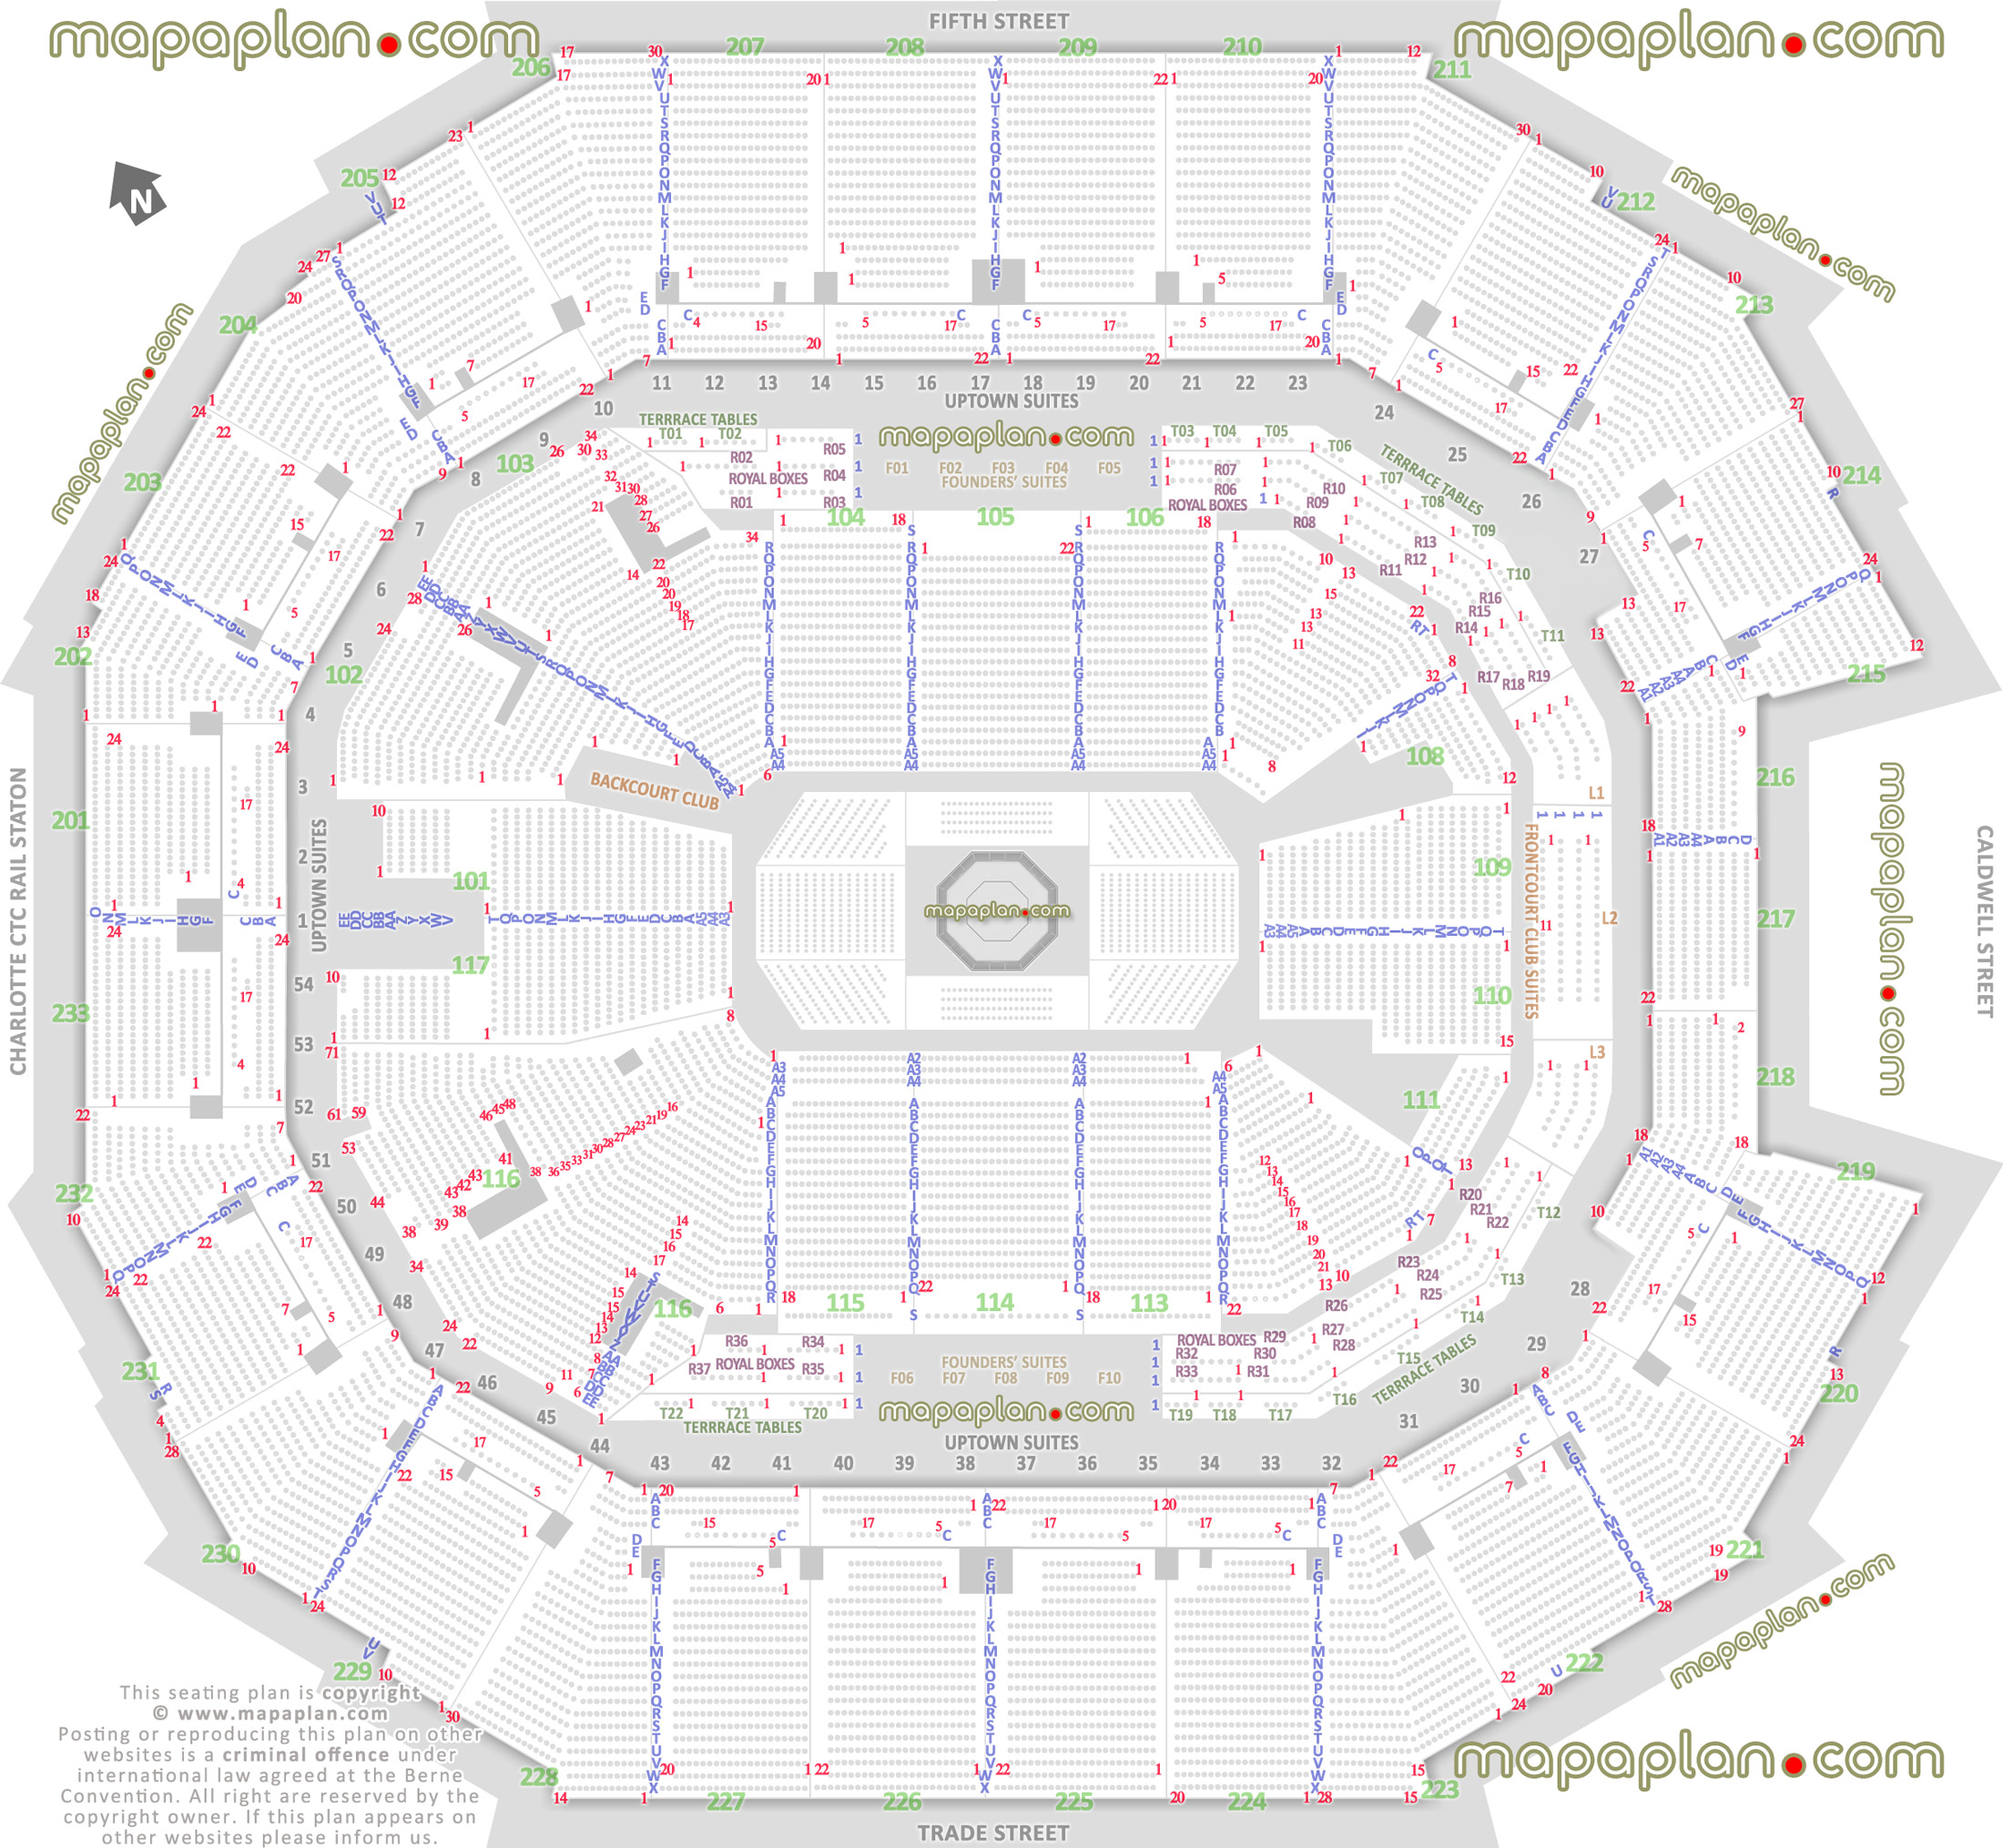 ufc mma fights charlotte north carolina usa detailed seating capacity arrangement arena row numbers layout lower upper level main entrance gate exits map west east south north detailed fully seated chart setup standing room only sro areas wheelchair disabled handicap accessible seats plan Charlotte Spectrum Center seating chart